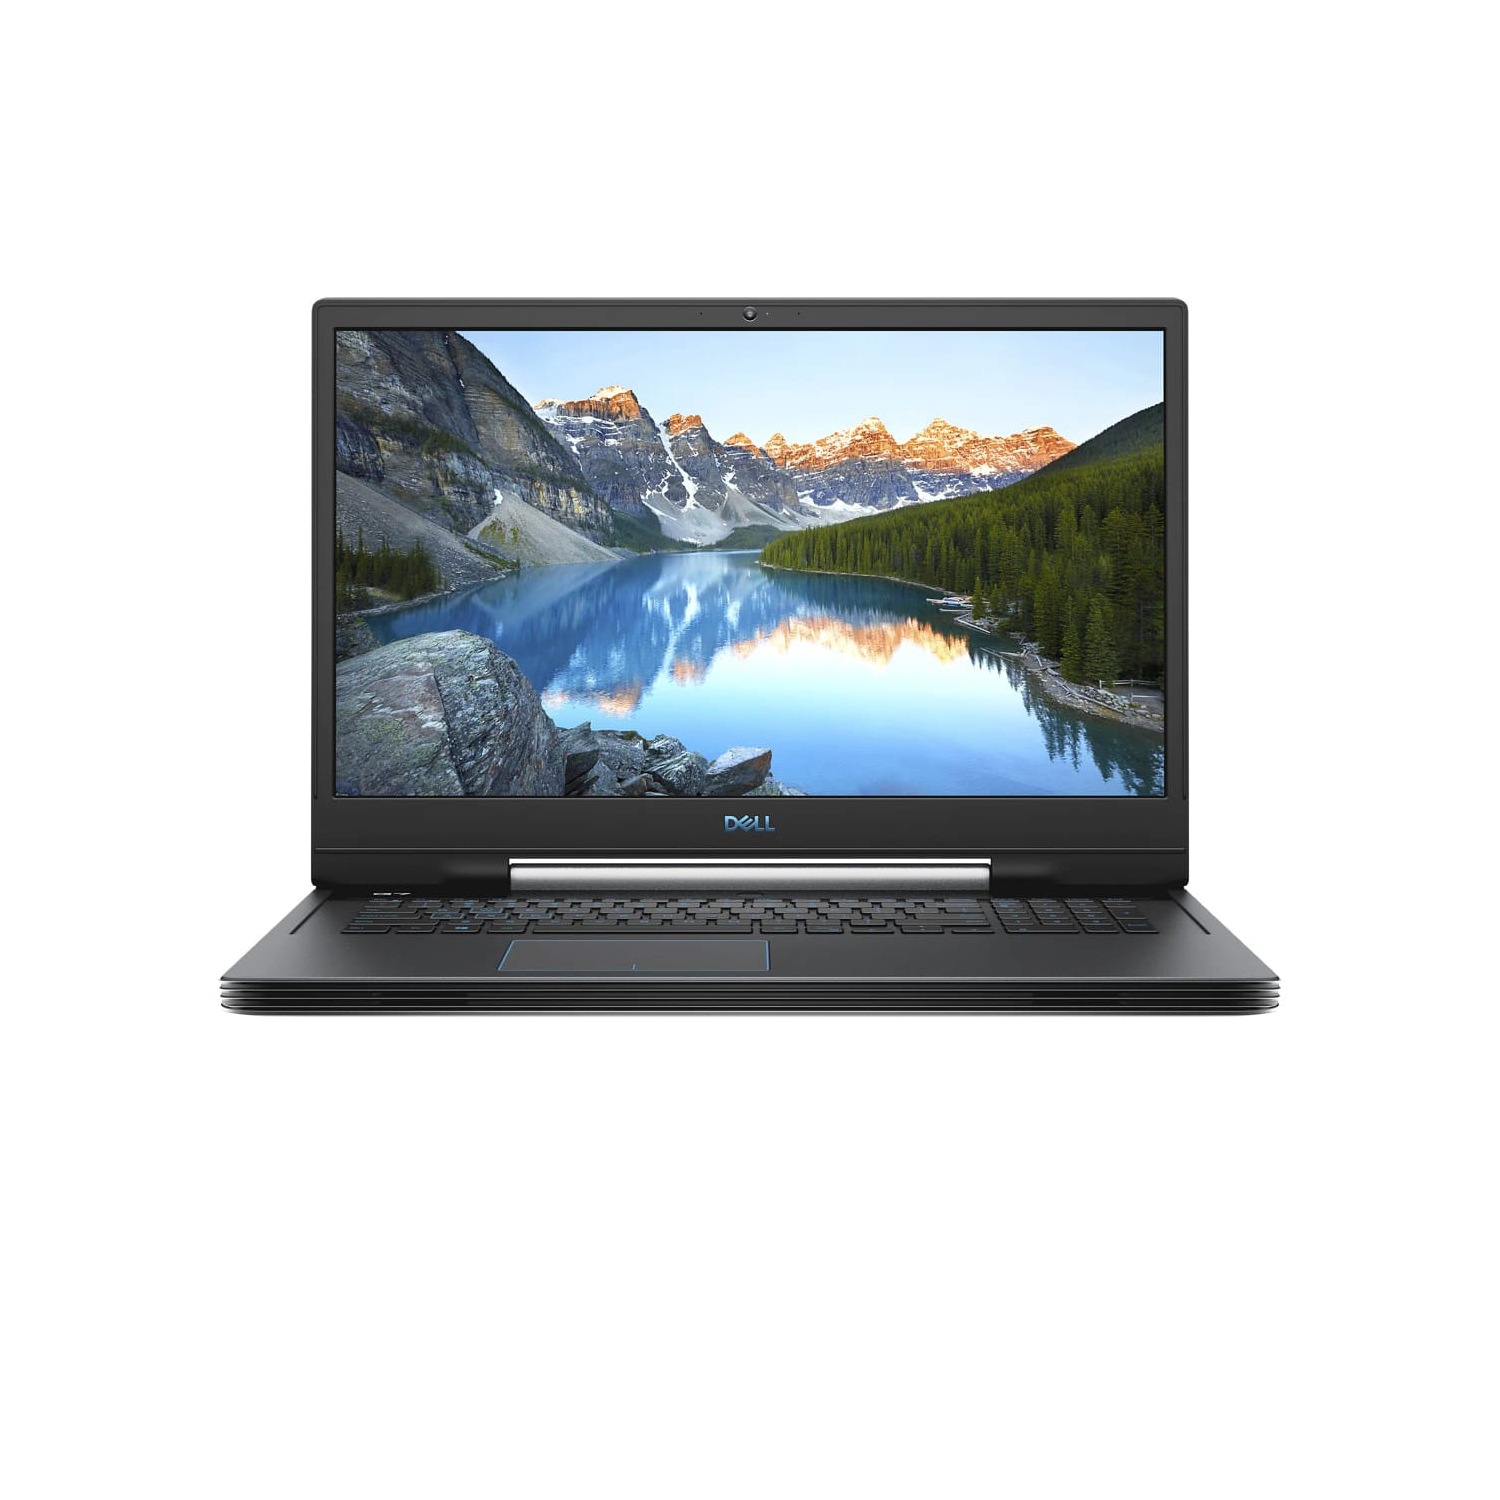 Refurbished (Excellent) – Dell G7 7790 Gaming Laptop (2019) | 17.3" FHD | Core i5 - 128GB SSD + 1TB HDD - 8GB RAM - RTX 2060 | 4 Cores @ 4.1 GHz - 6GB GDDR6